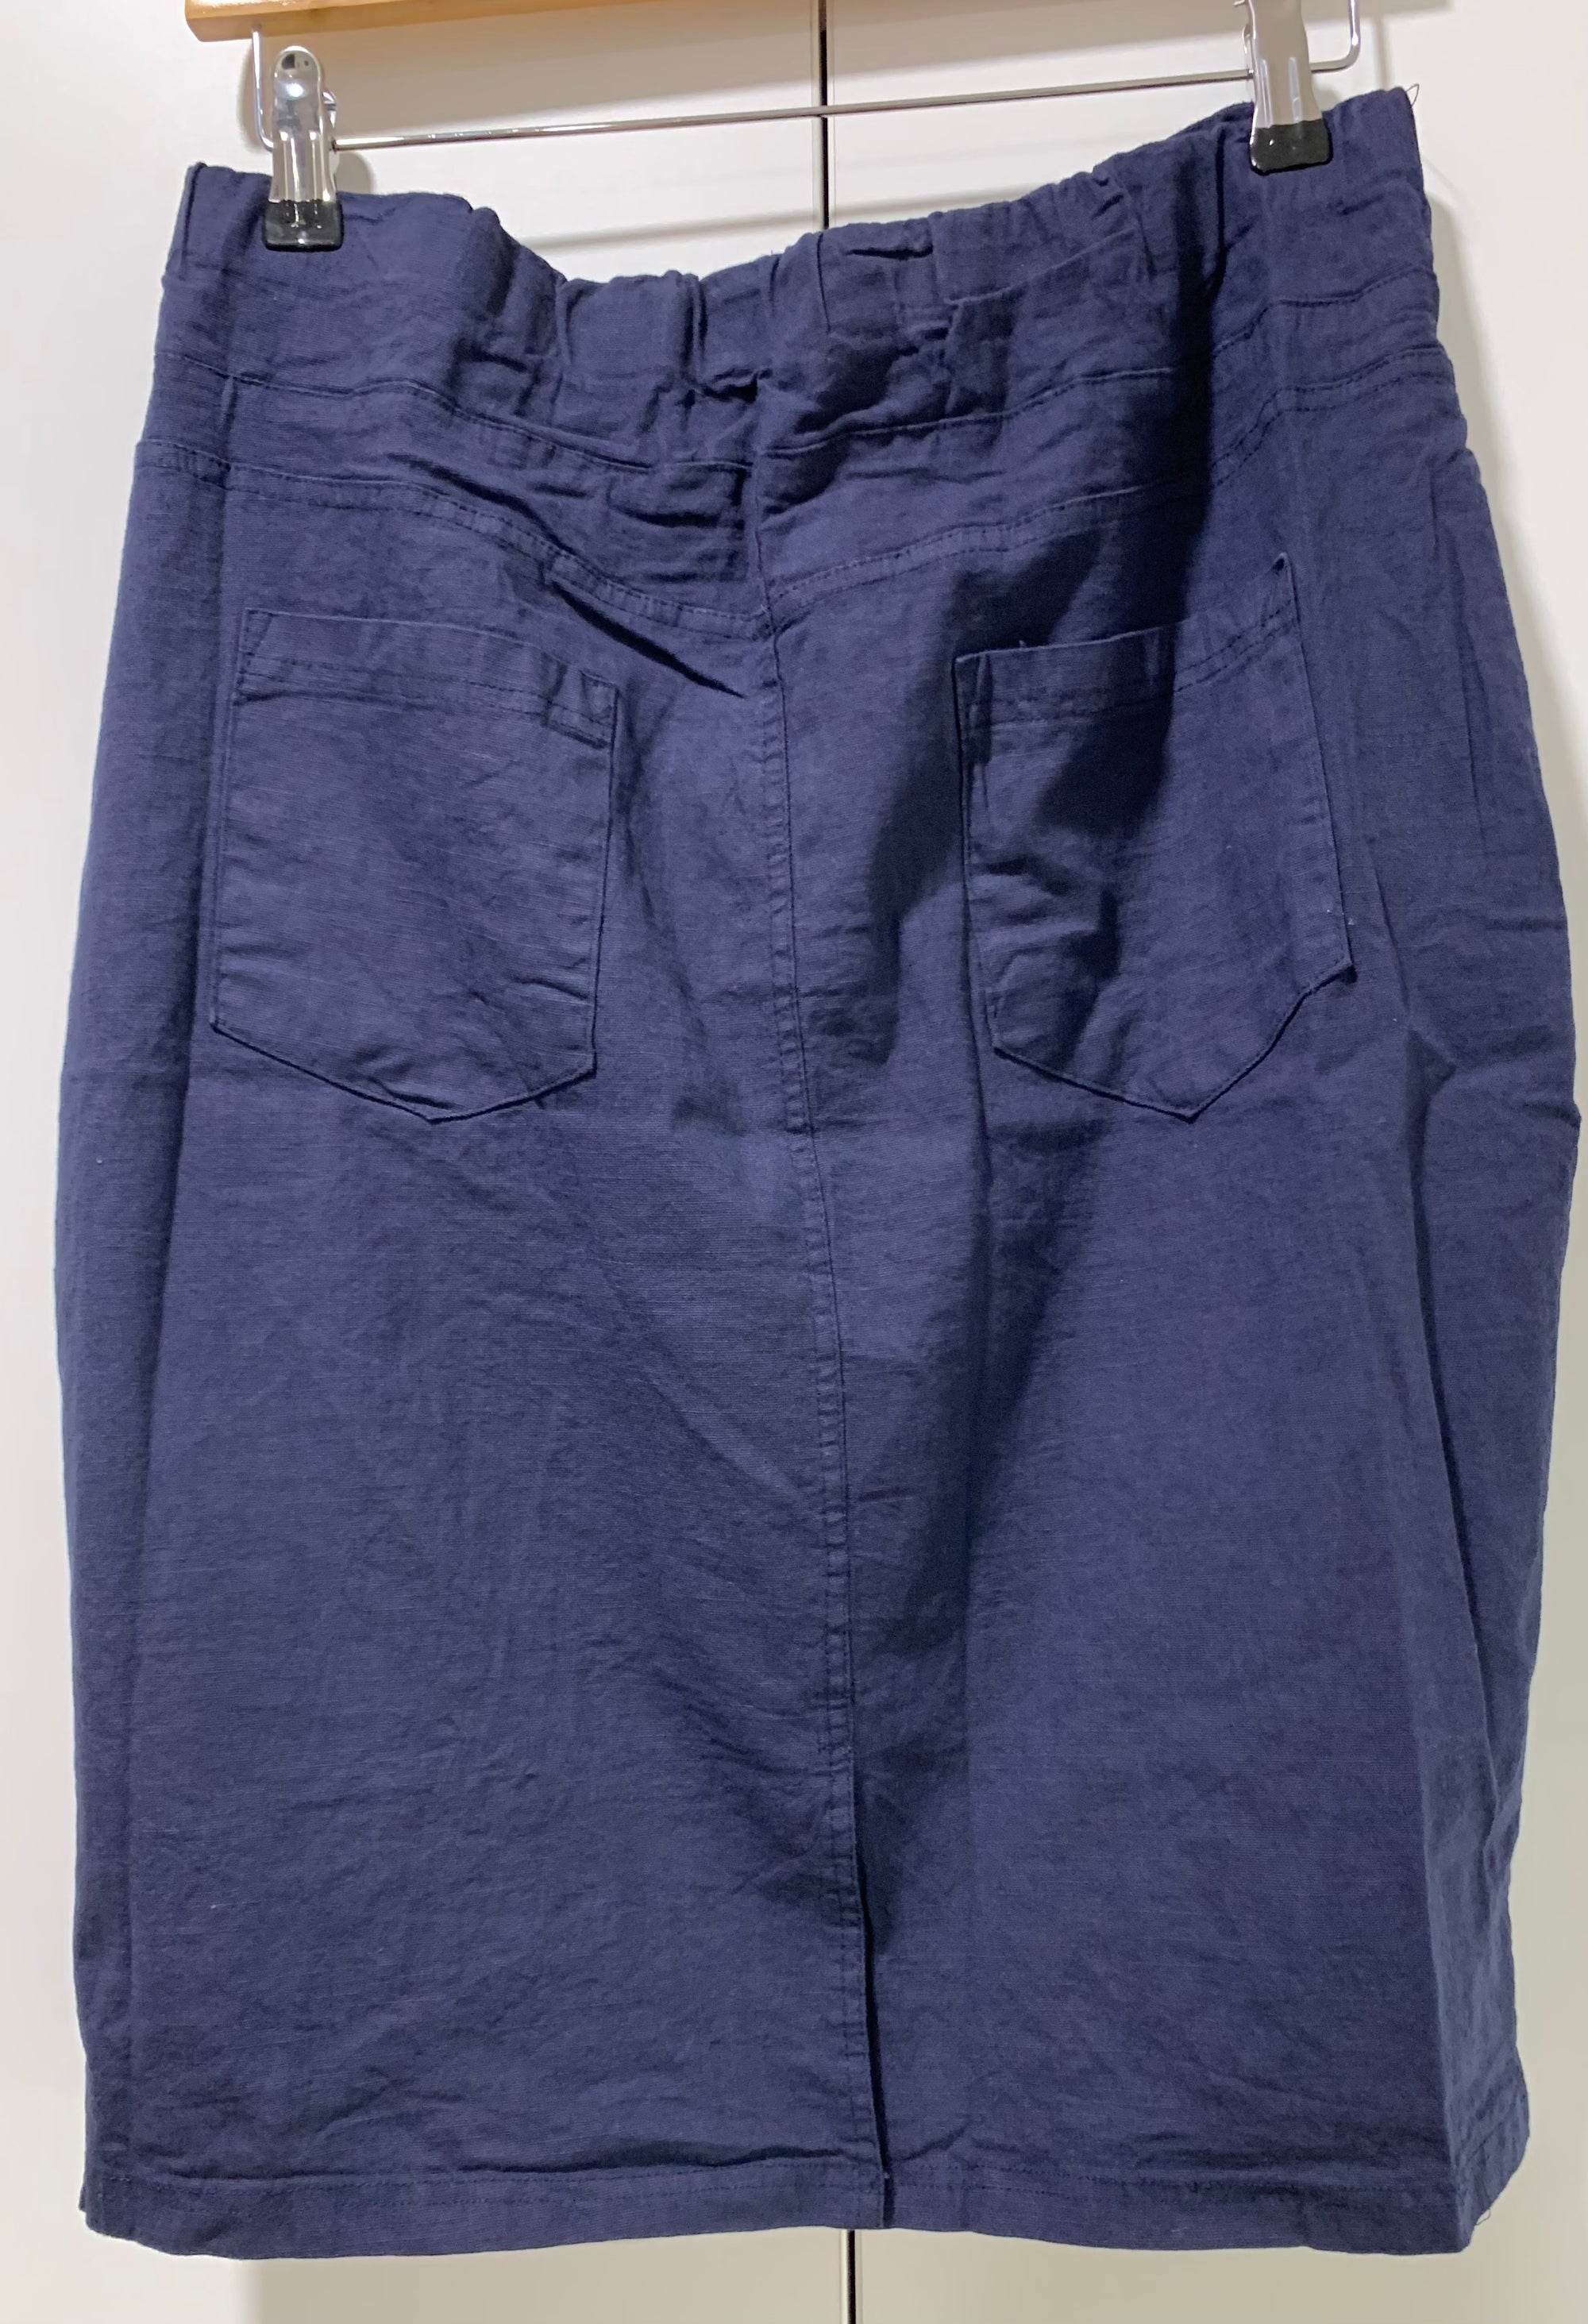 Short Skirt in Navy Blue Four Way Stretch Linen Blend Super Elastic & Comfortable - Willow Tree